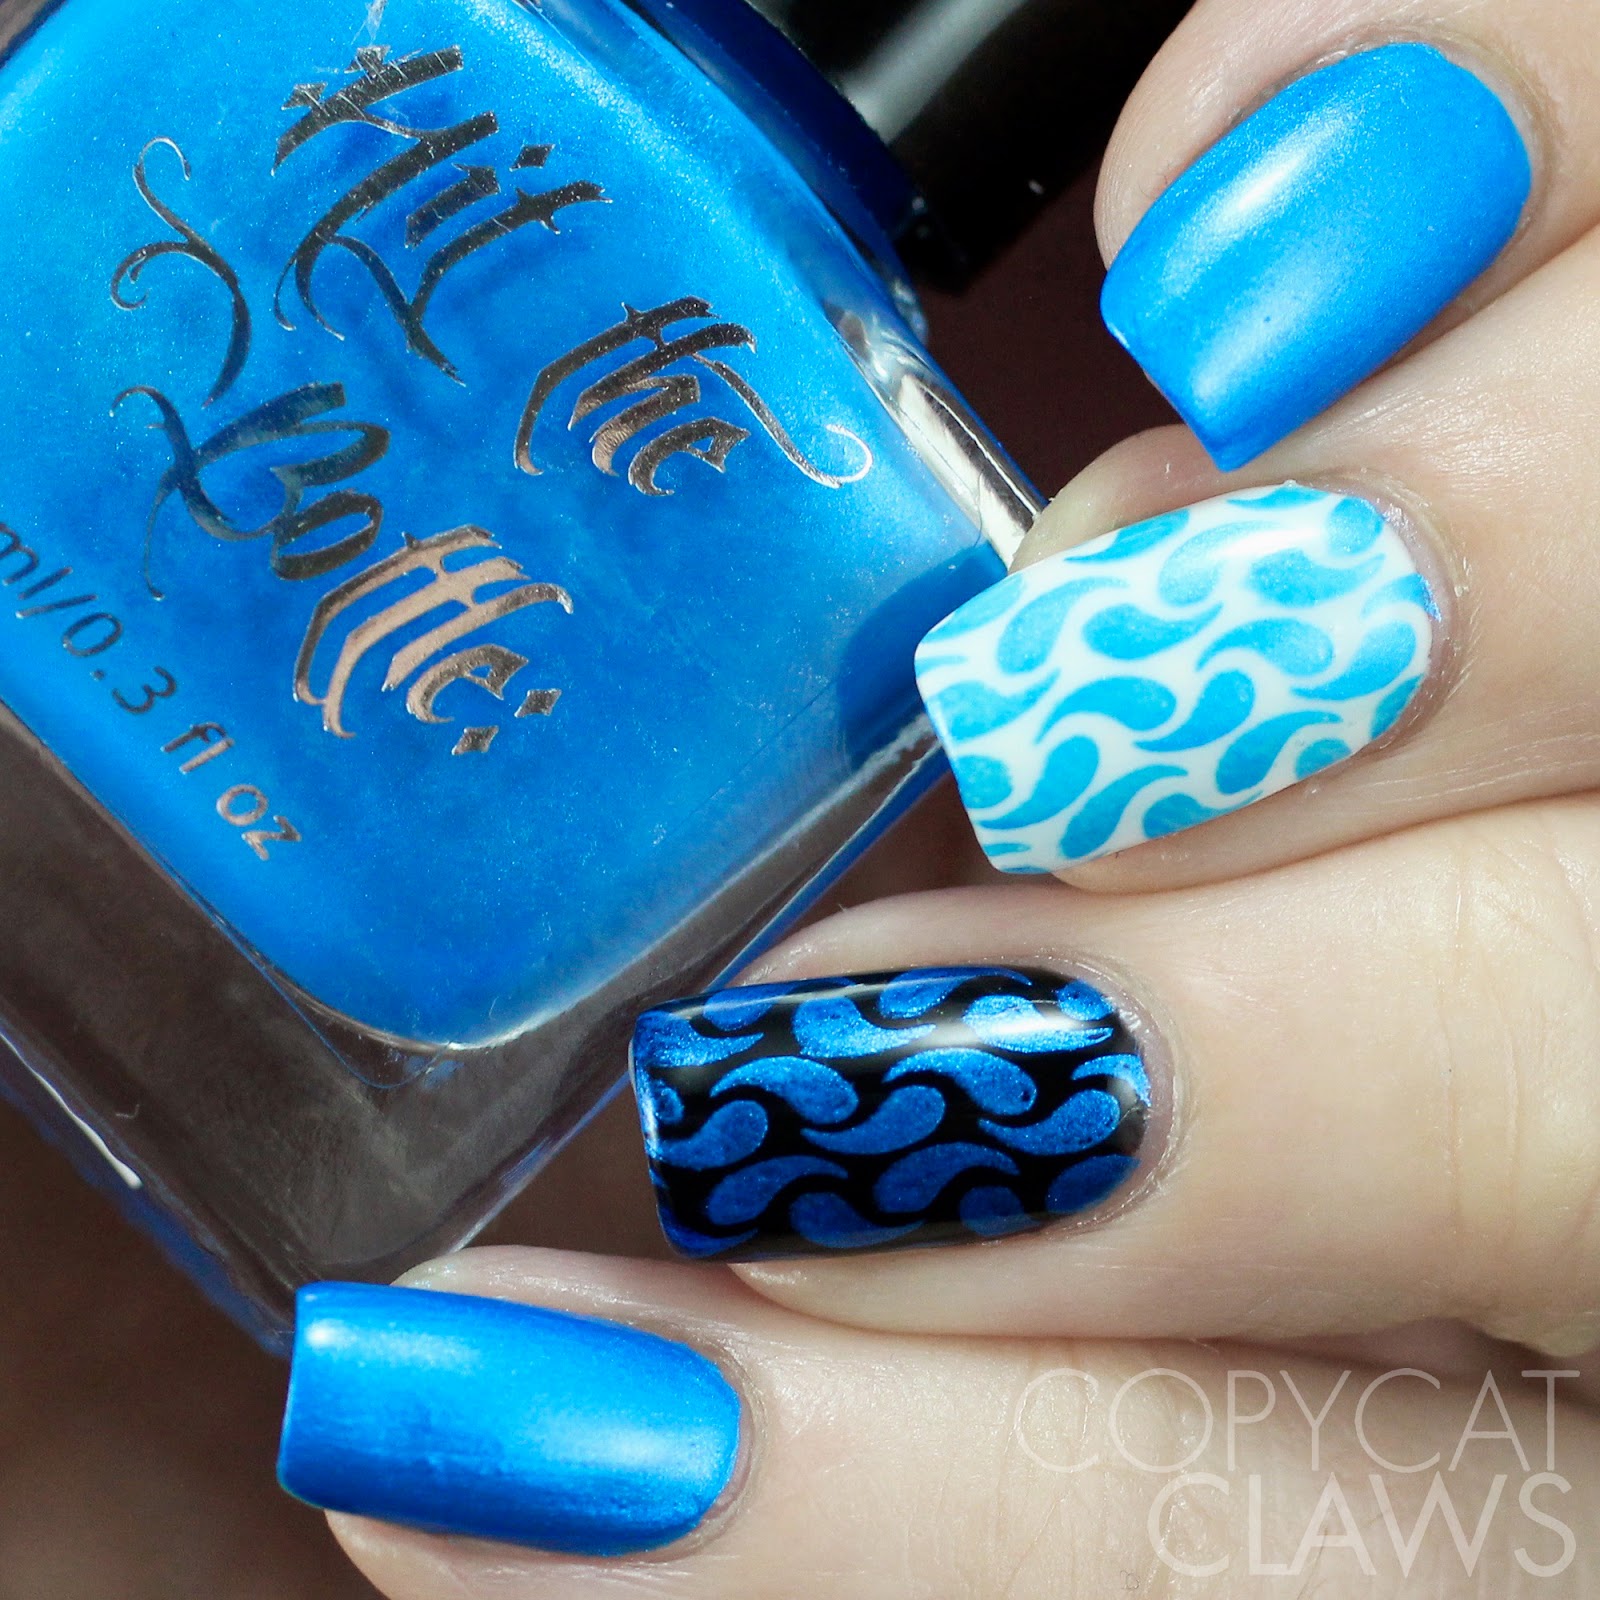 Copycat Claws: Hit The Bottle Stamping Polish Swatches